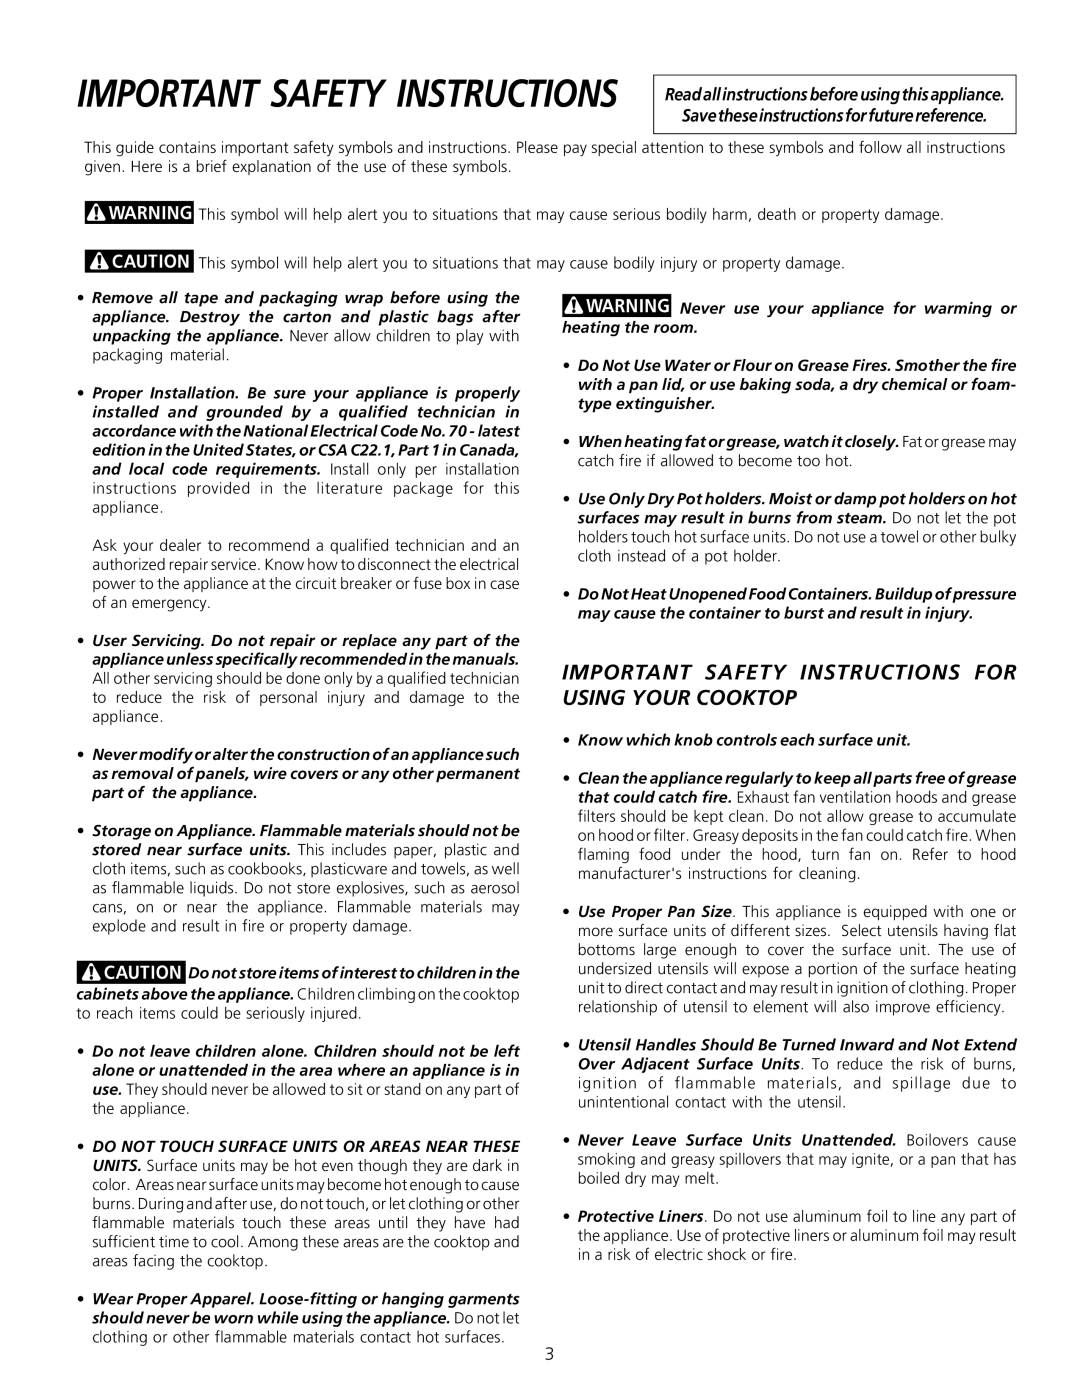 Frigidaire 318200603 Important Safety Instructions For Using Your Cooktop, Readallinstructionsbeforeusingthisappliance 